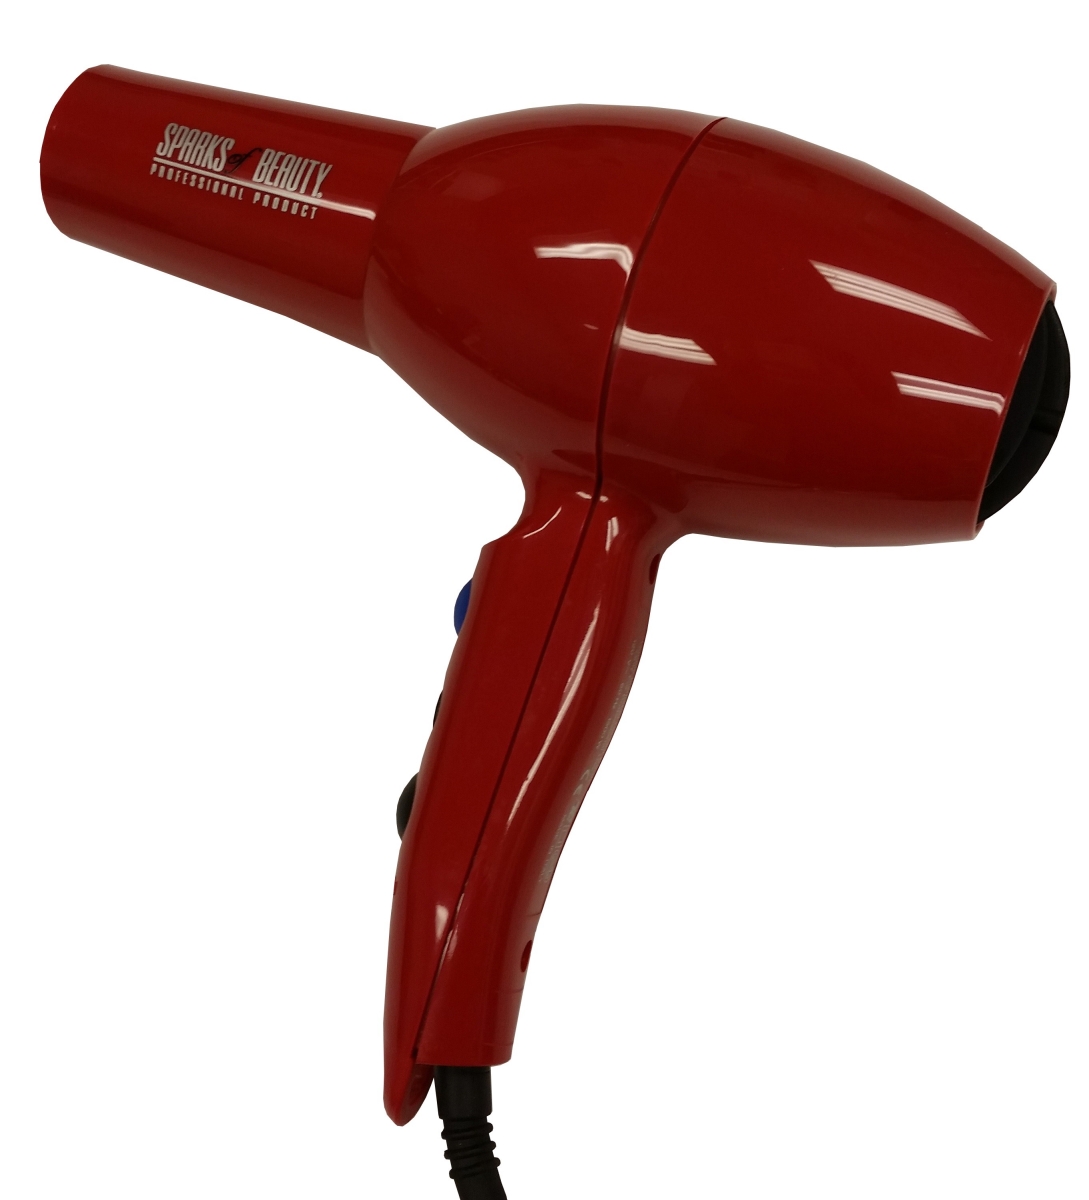 Sparks Of Beauty Hair Dryer, Red